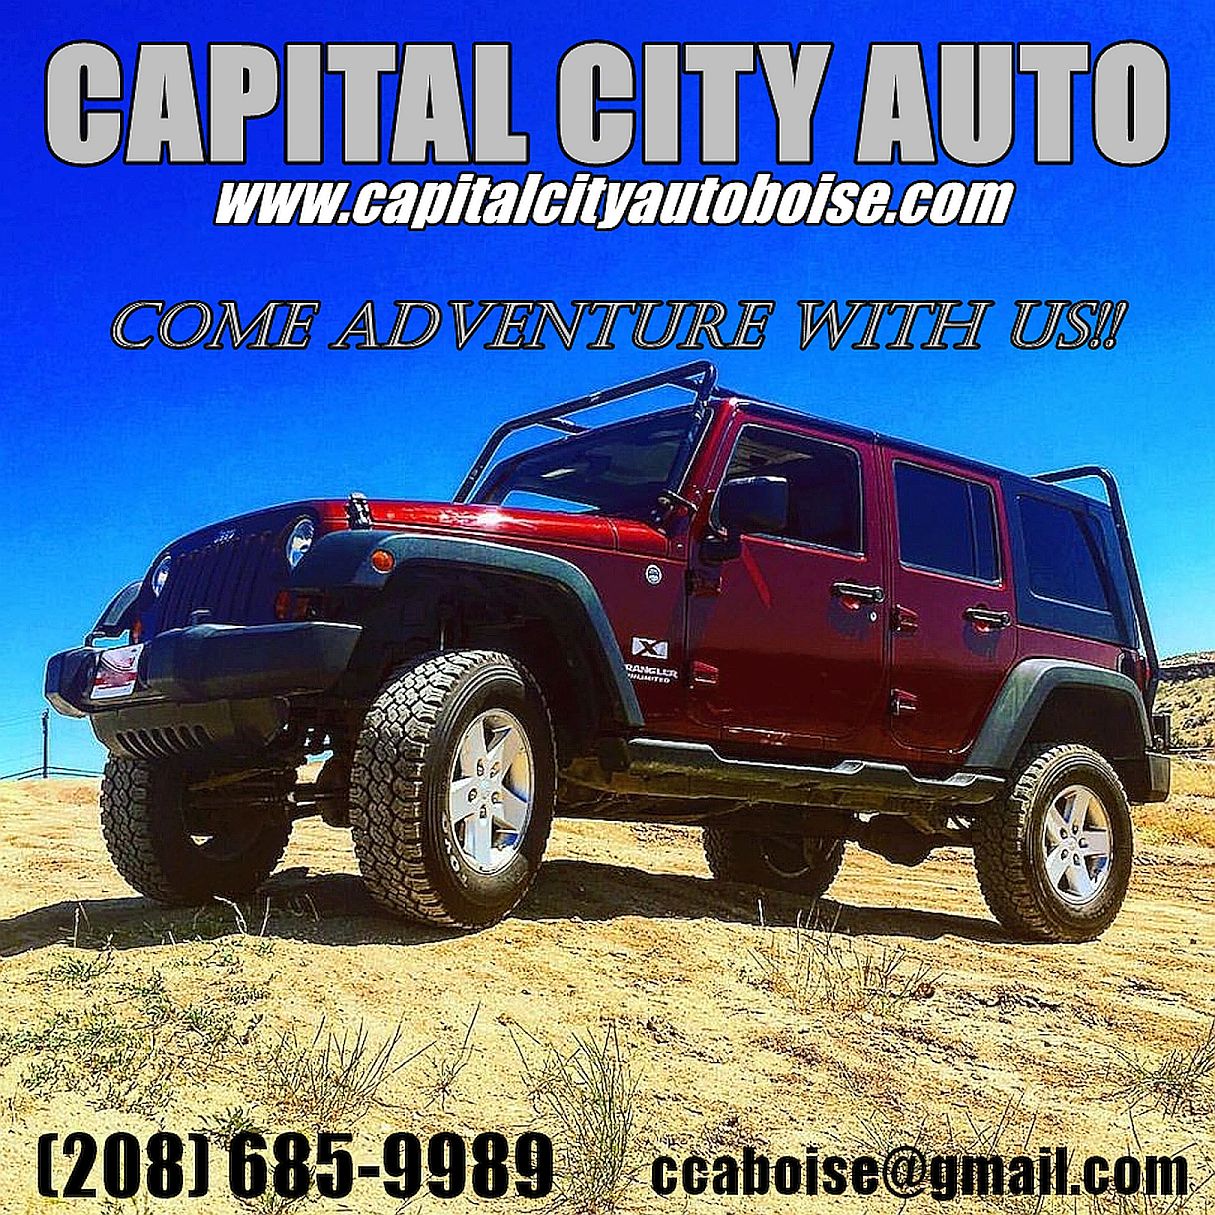 Contact Capital City Auto for Used Cars